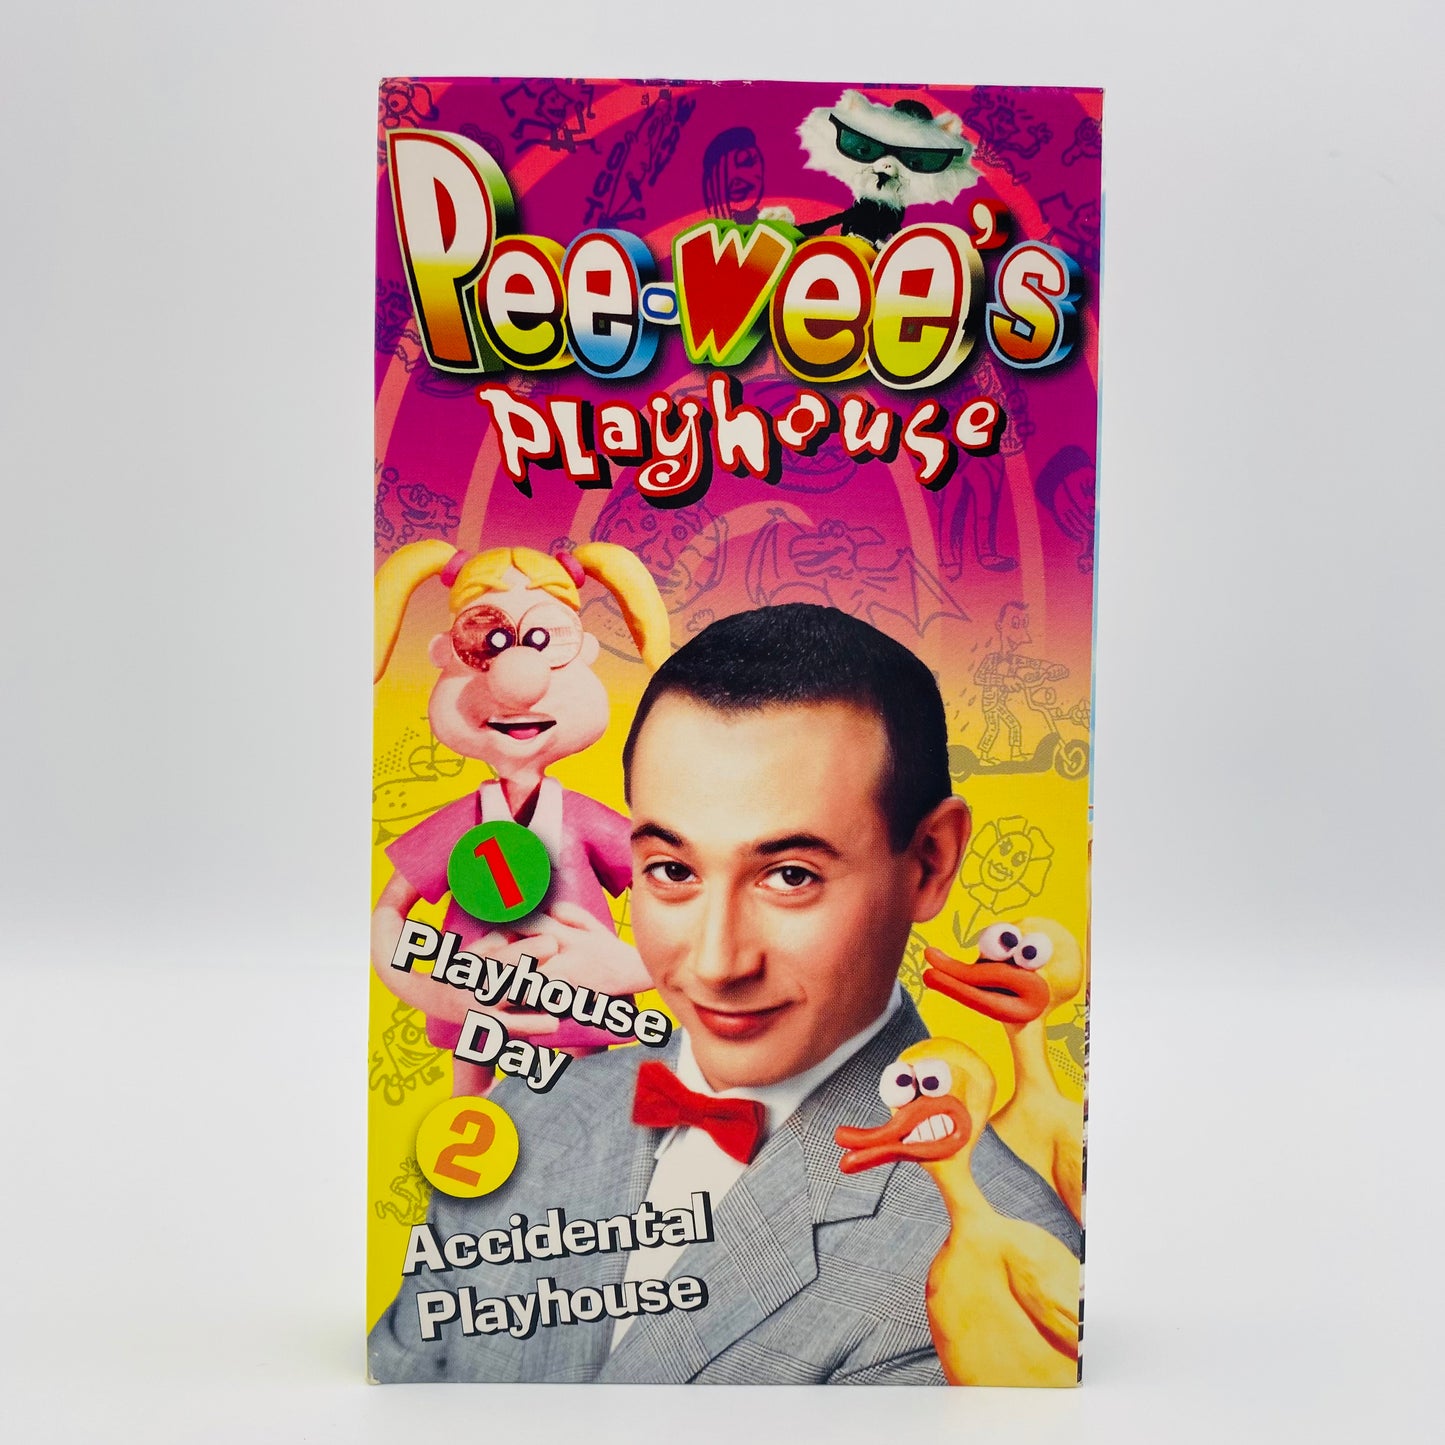 Pee-Wee’s Playhouse volume 12 VHS tape (1996) MGM/UA Home Video